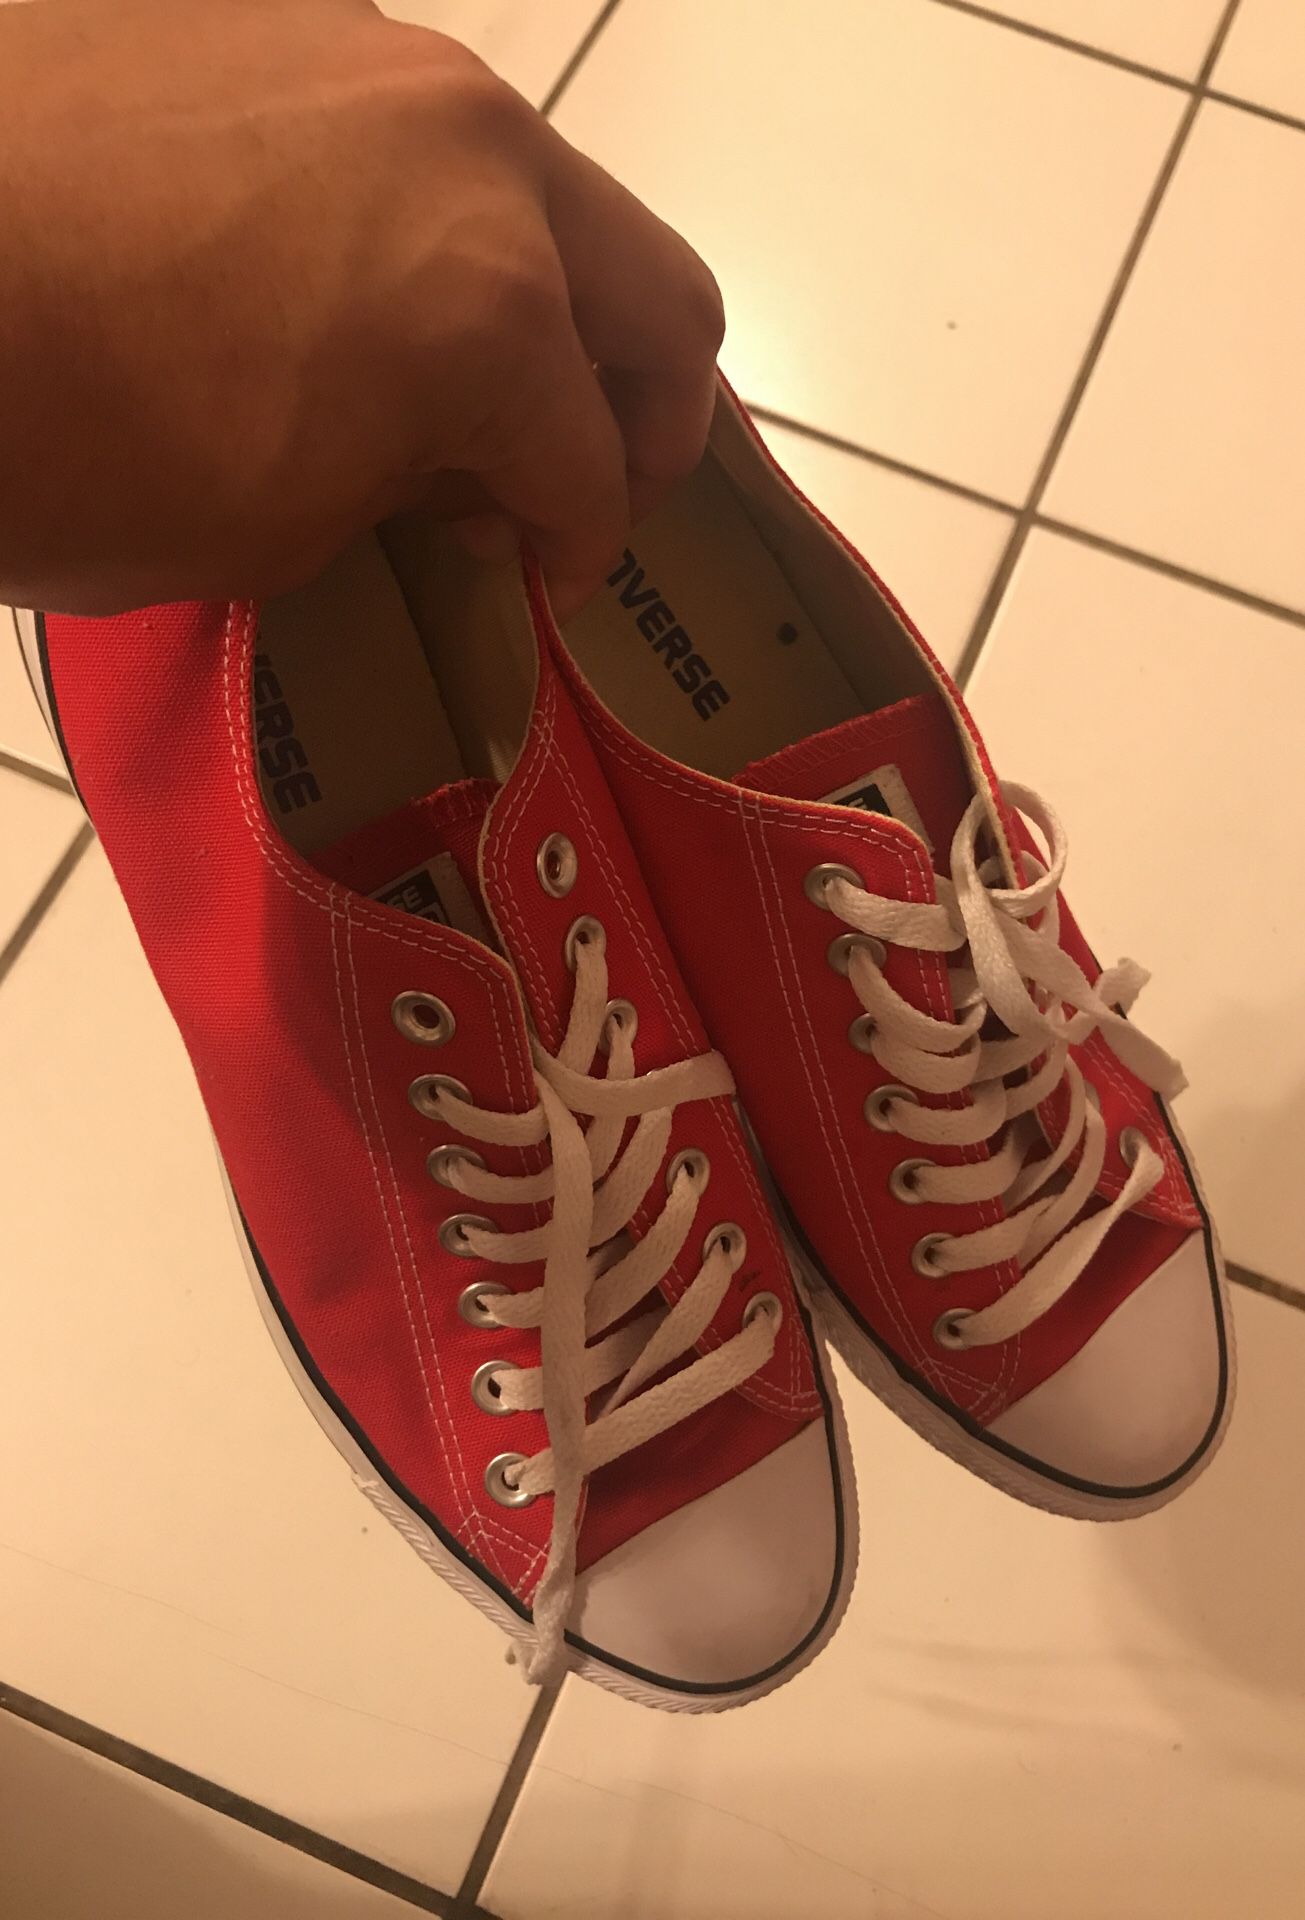 Red Converse